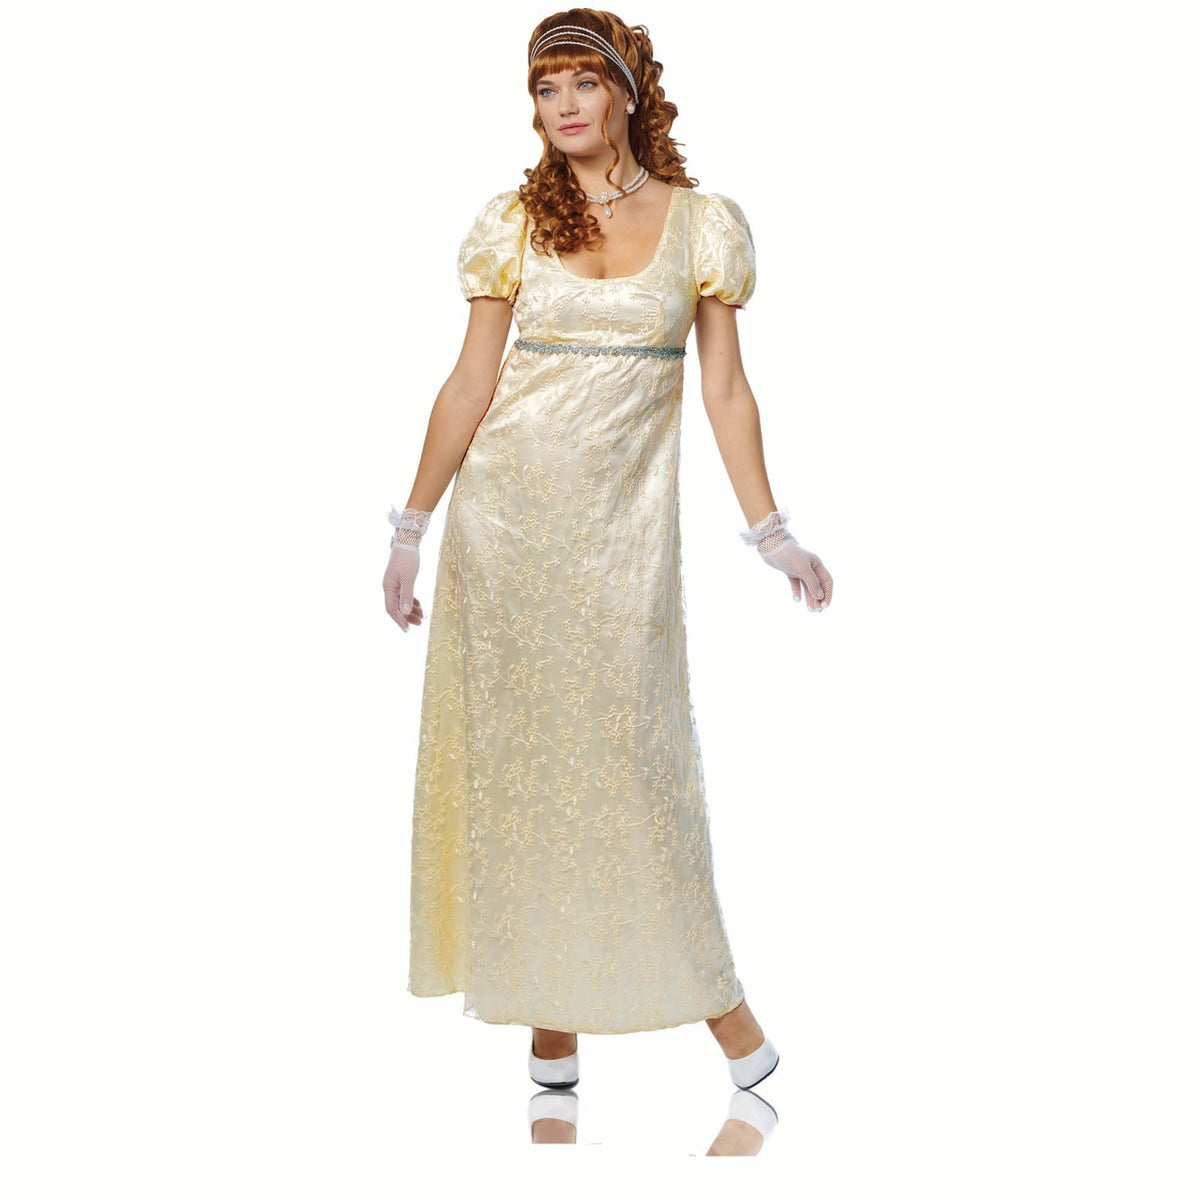 COSTUME CULTURE BY FRANCO Costumes Regency Garden Costume for Adults, White Dress